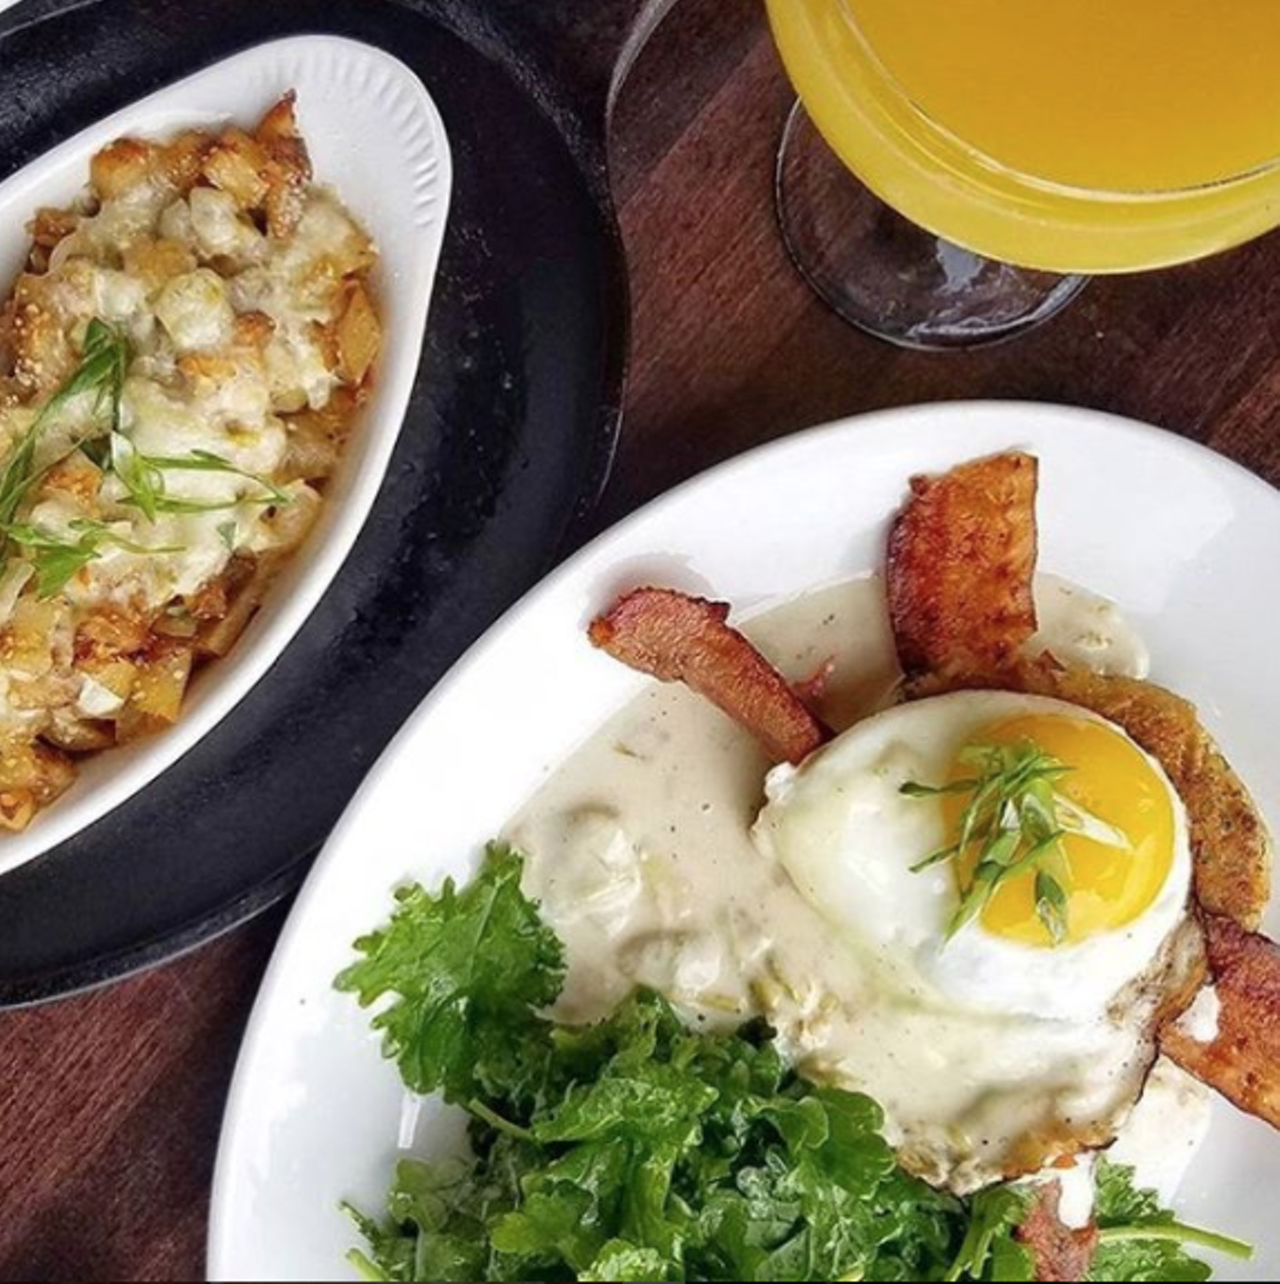 General Public 
17619 La Cantera Parkway Suite 102, (210) 920-1101, thegenpublic.com
From 10:30 a.m. to 2 p.m. on Saturdays and Sundays, get your fix of brunch fare and $1 mimosas. 
Photo via Instagram,  thegenpublic